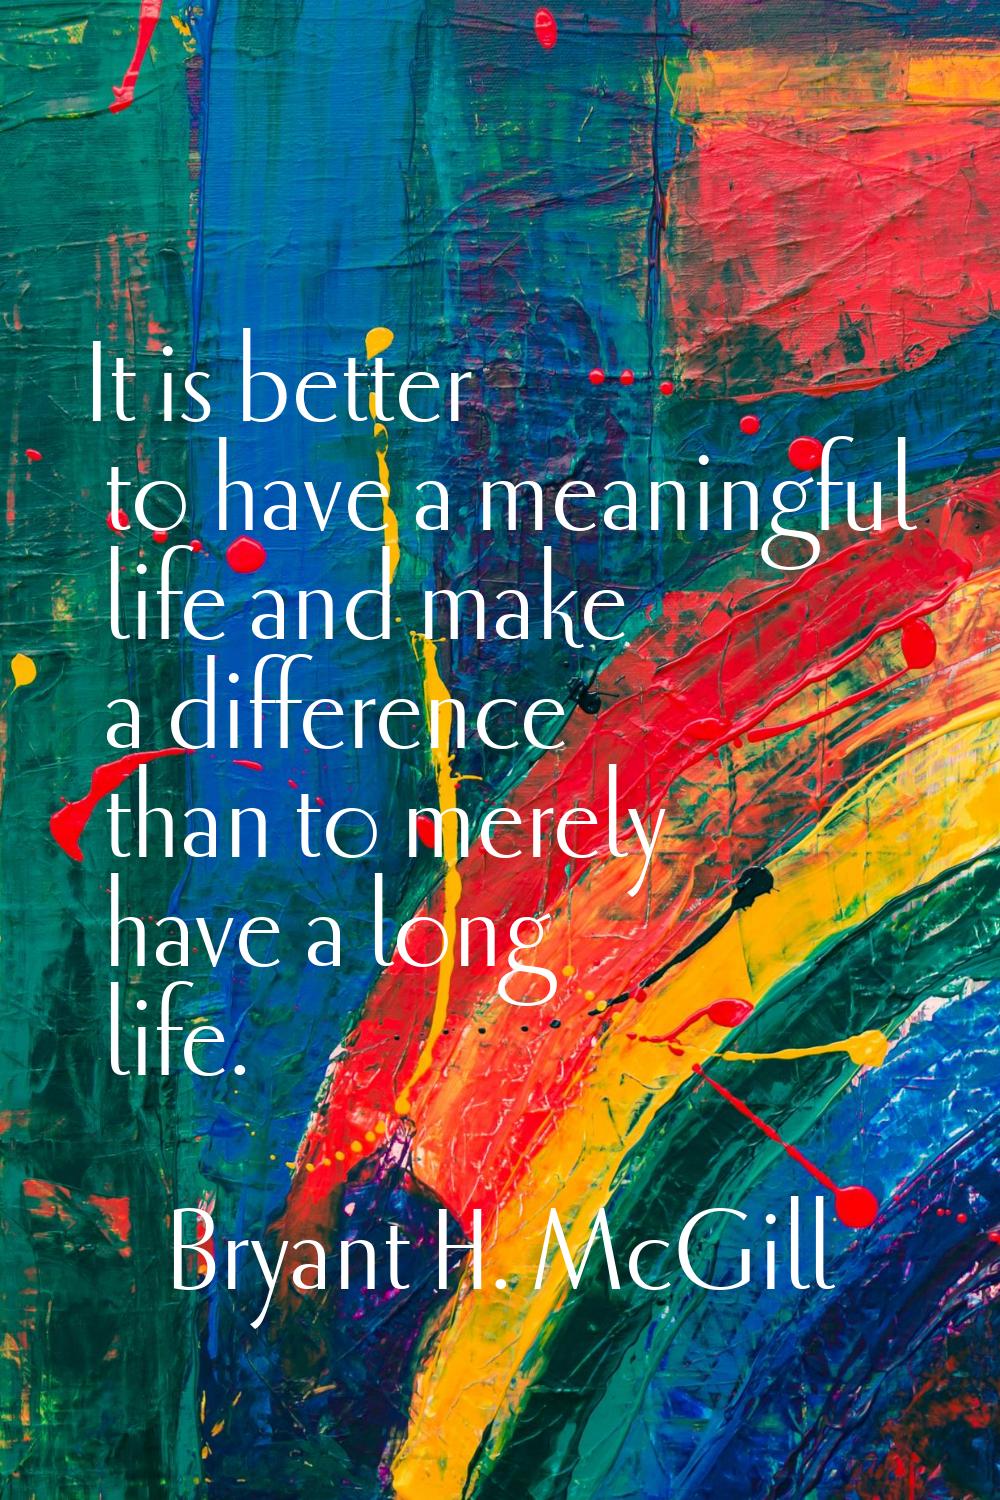 It is better to have a meaningful life and make a difference than to merely have a long life.